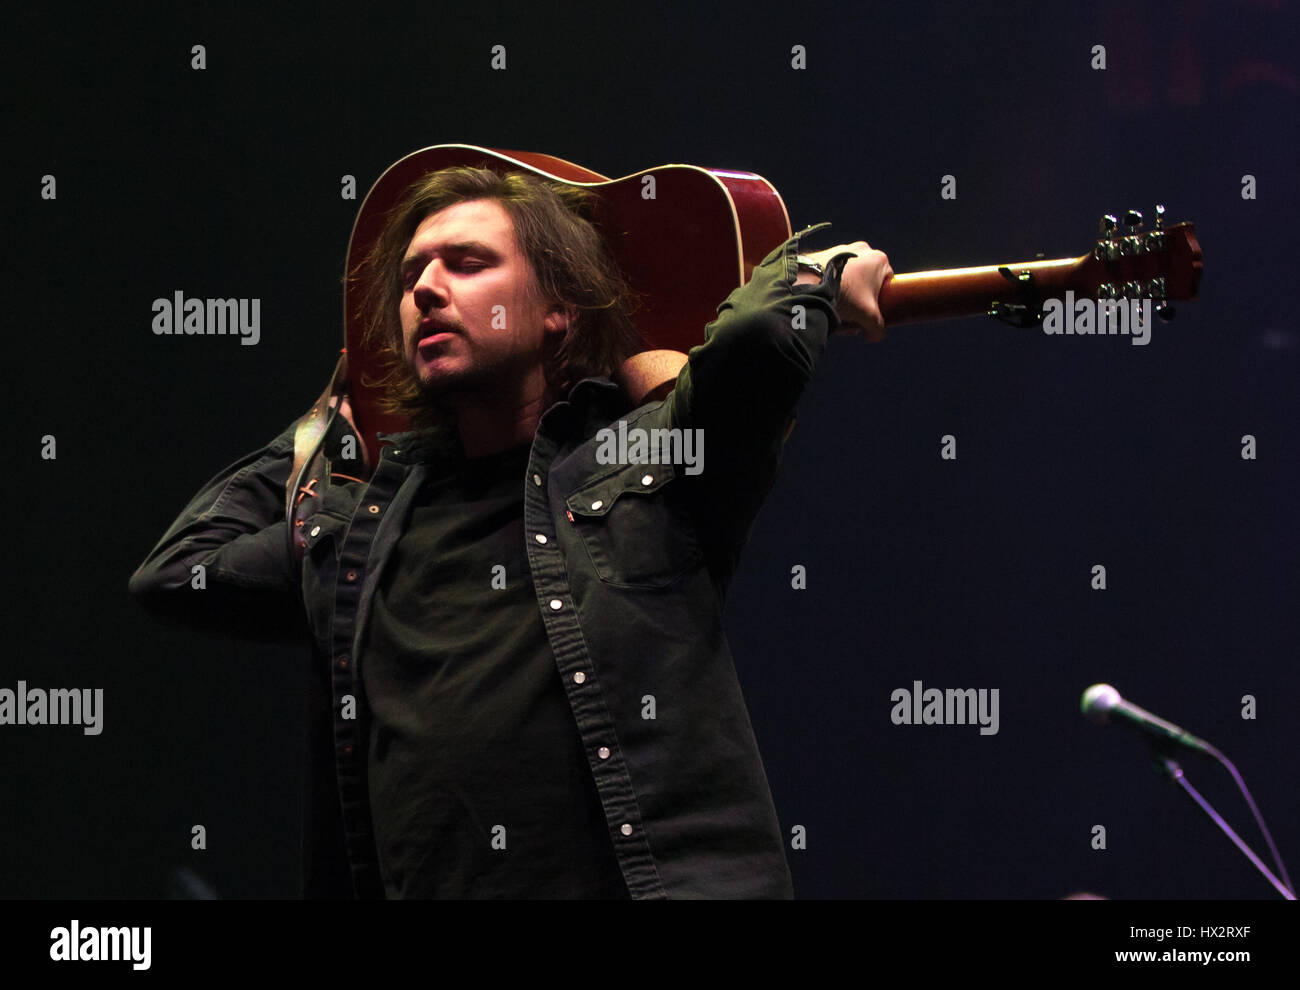 Justin Osborne lead singer for the American indie rock band Susto performs in concert in London, Canada on March 22, 2017, Stock Photo